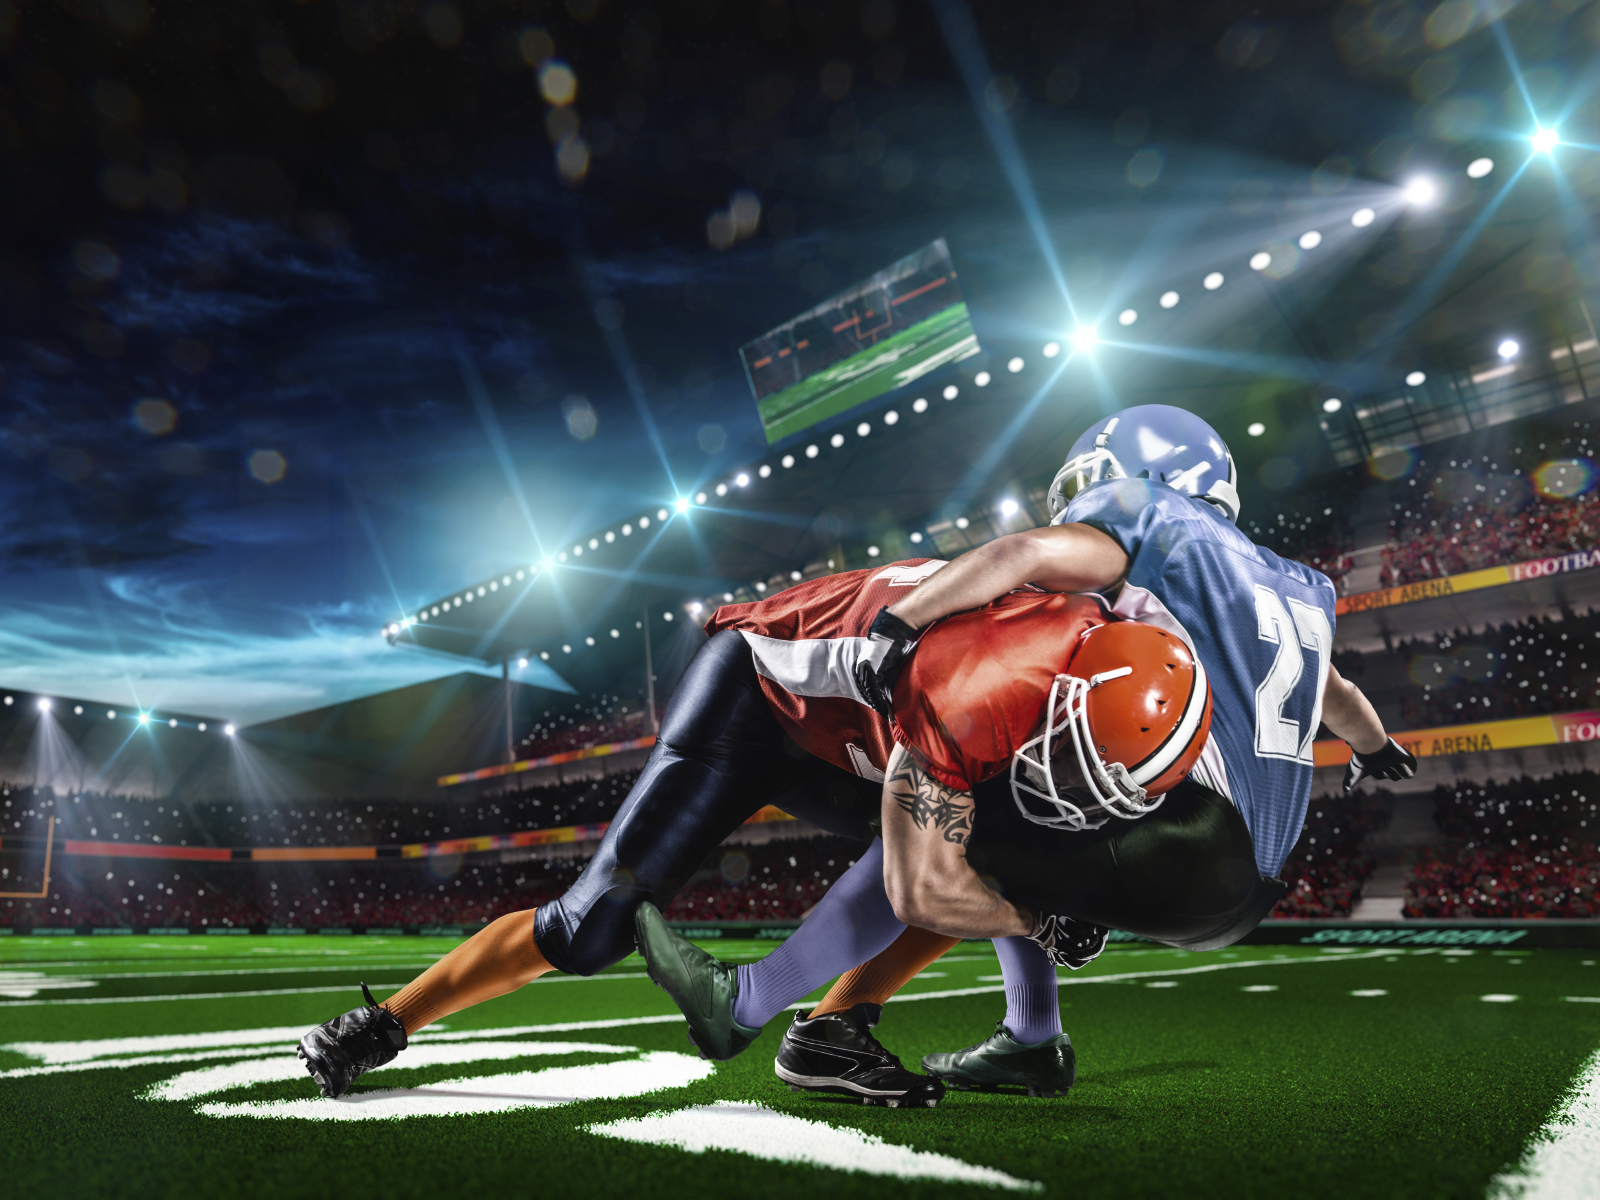 Valnød Governable snap Fox Sports To Broadcast Live Football Games In VR - IPG Media Lab